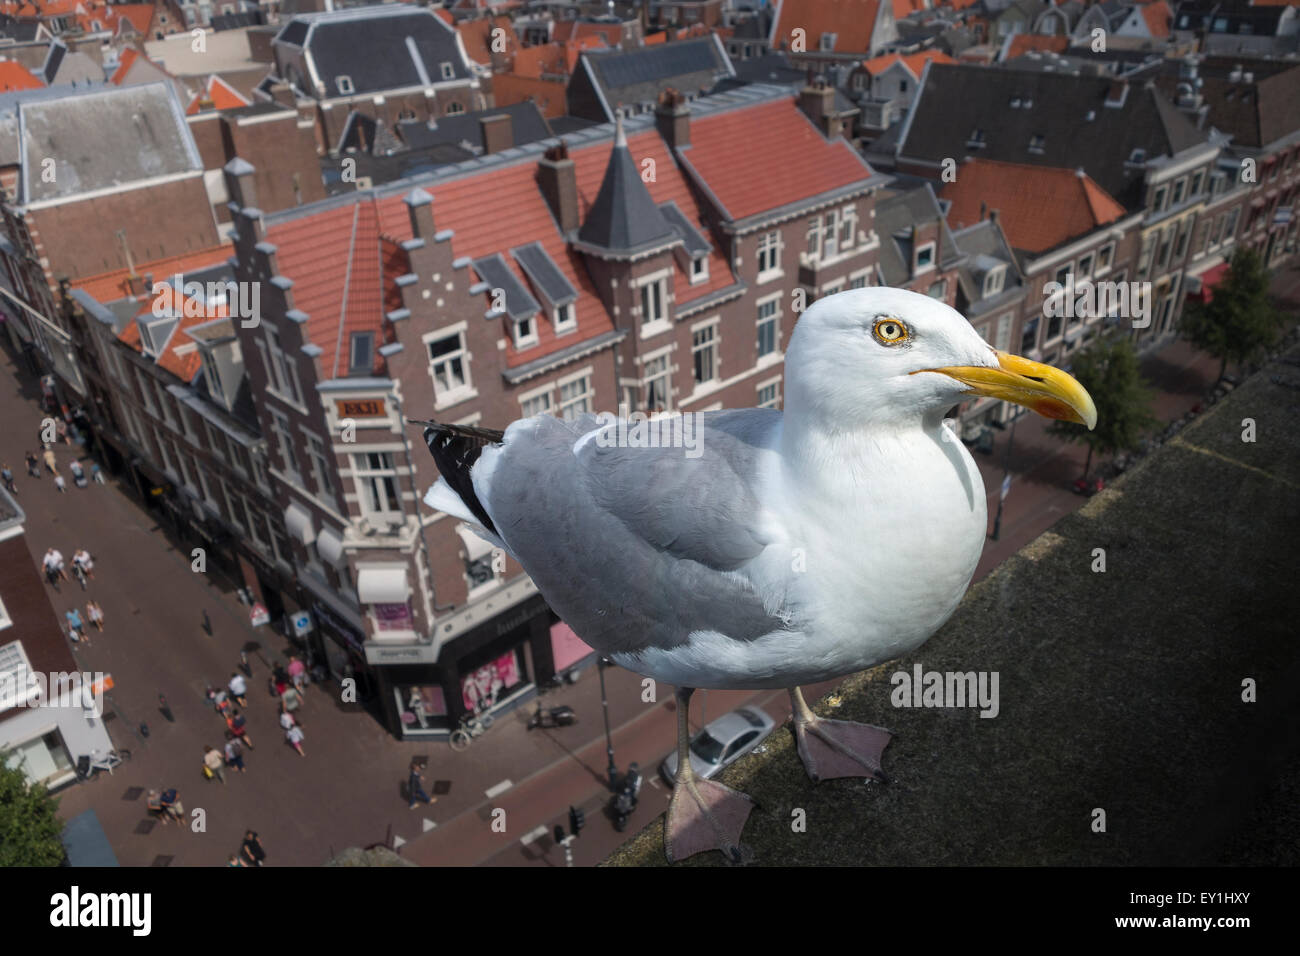 A large Dutch Seagull, Herring Gull (Larus argentatus argenteus) on a roof high above the city of Haarlem, The Netherlands. Stock Photo